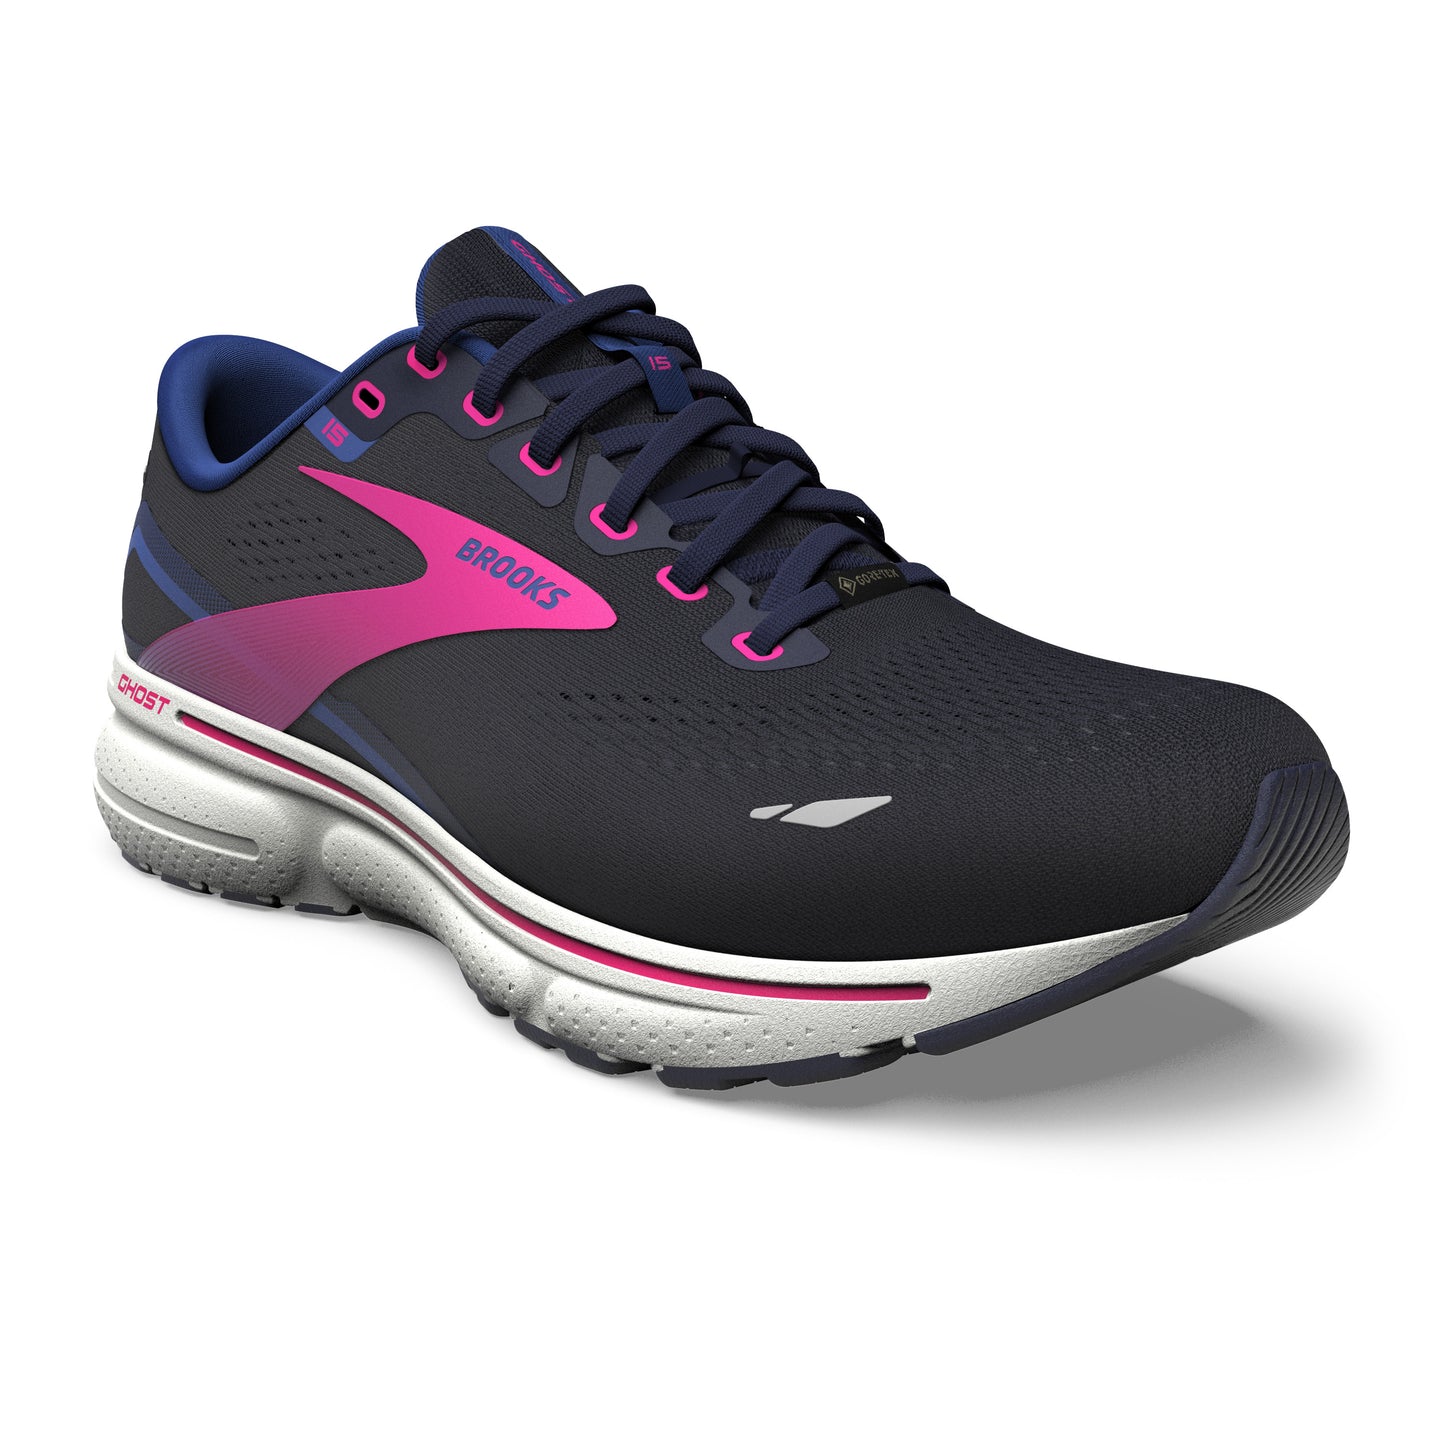 Ghost 15 GTX::Peacoat/Blue/Pink